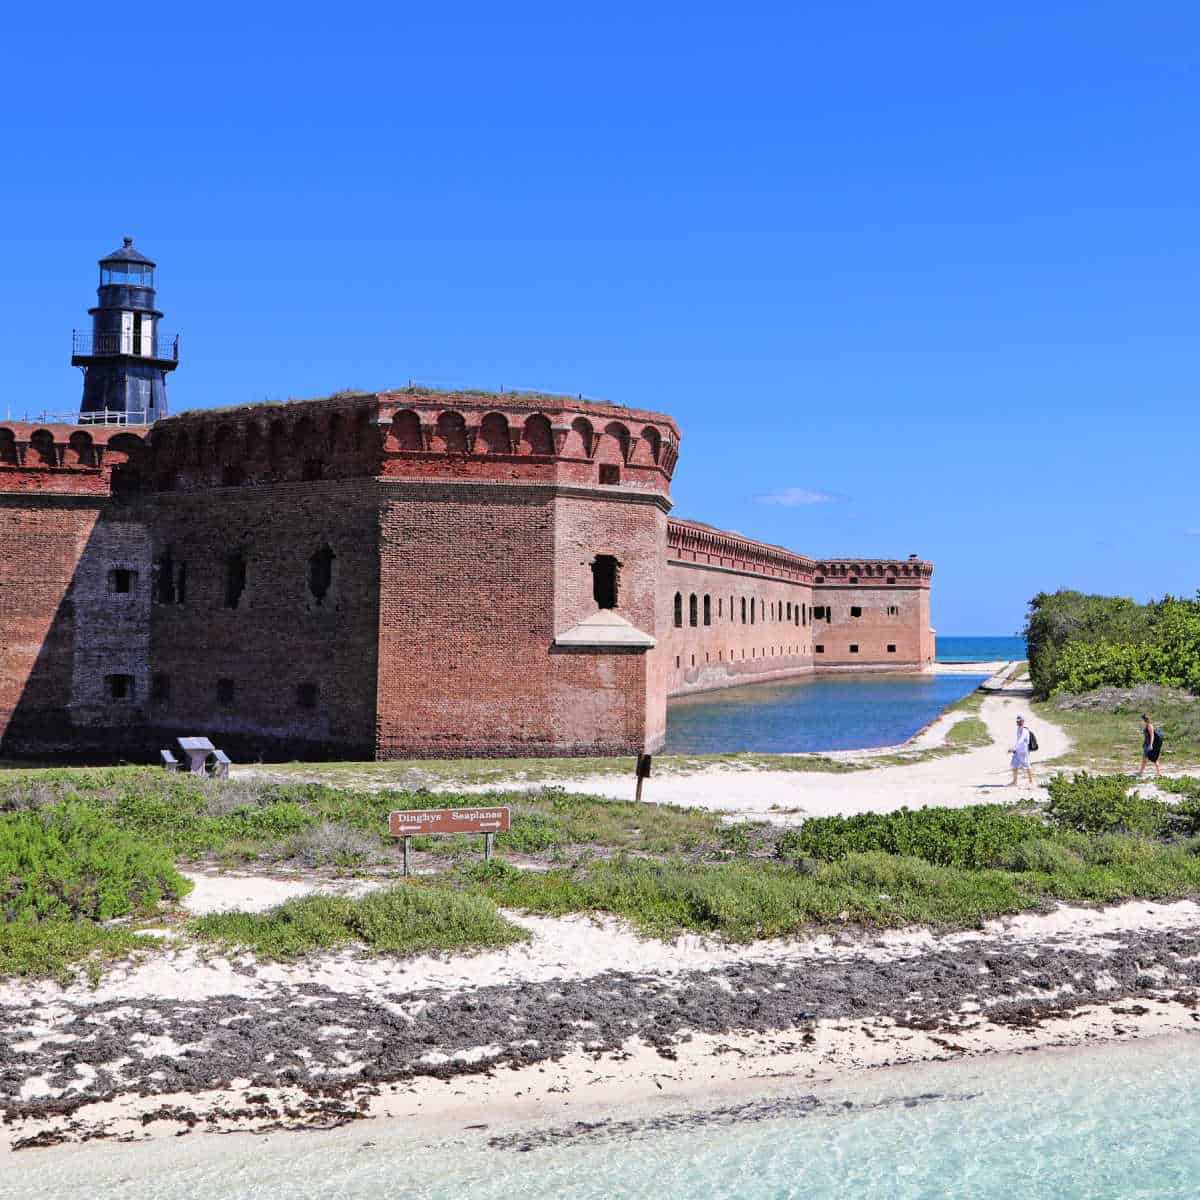 Historic Fort Jefferson and the Dry Tortugas Lighthouse at Dry Tortugas National Park in Florida